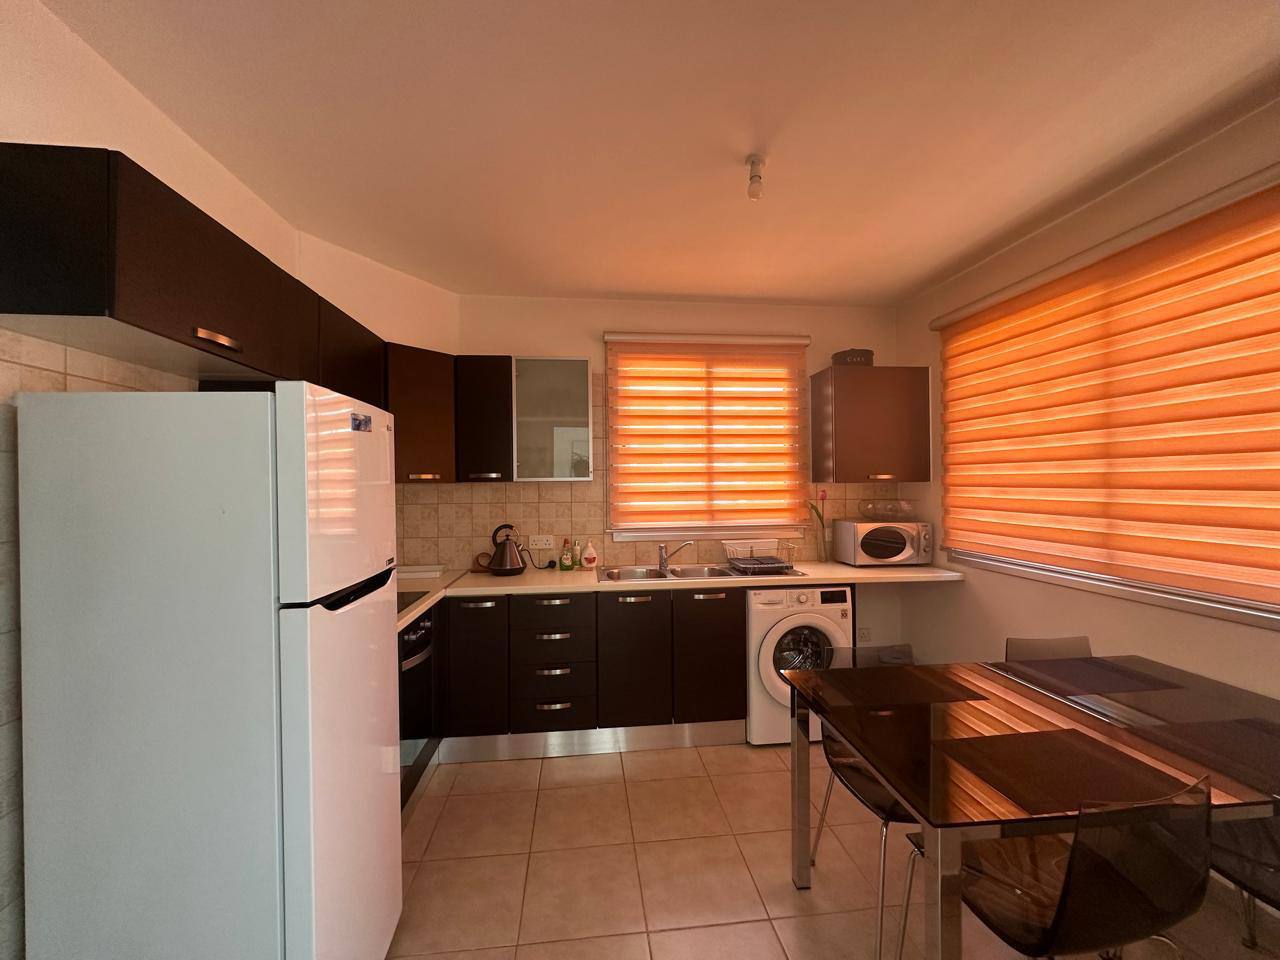 3 Bedroom Apartment for Rent in Germasogeia, Limassol District